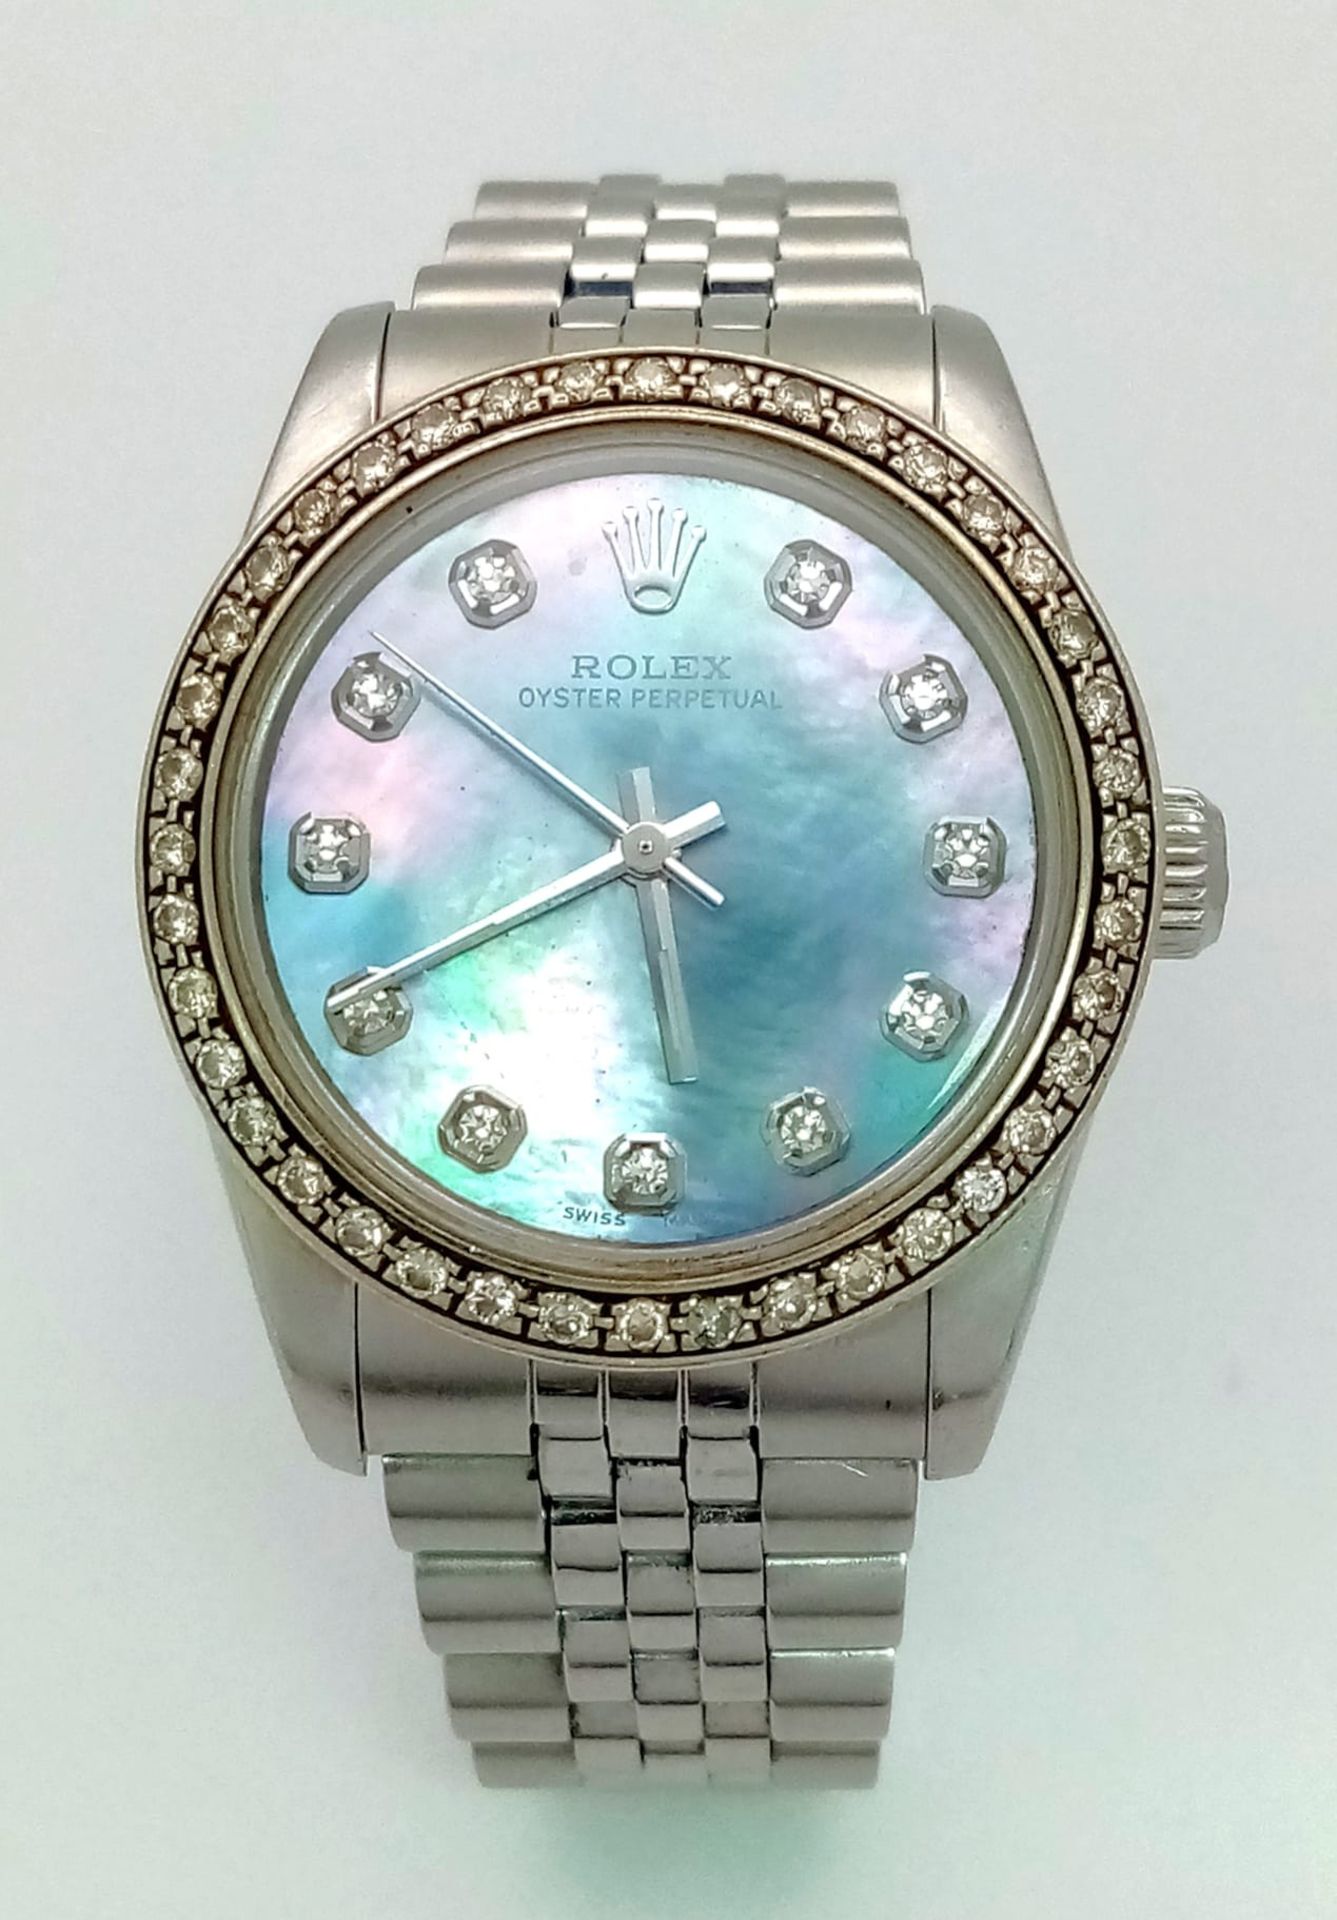 A ROLEX LADIES OYSTER PERPETUAL WRIST WATCH IN STAINLESS STEEL WITH DIAMOND BEZEL AND NUMERALS. - Image 2 of 9